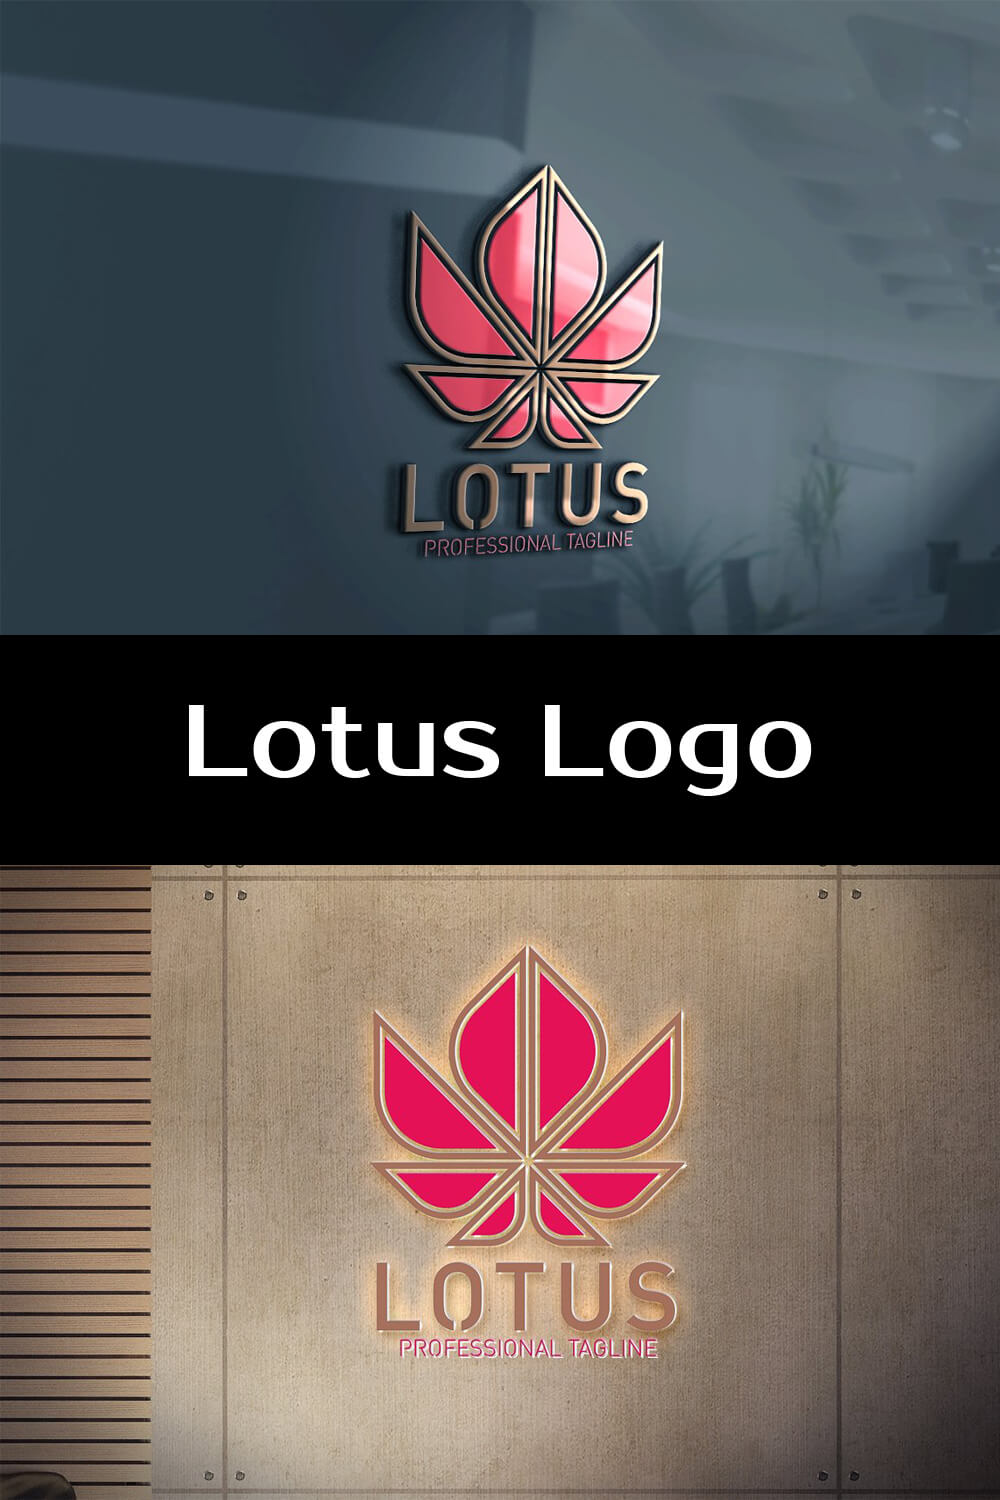 Logo with the image of a red lotus on a glossy and matte background.